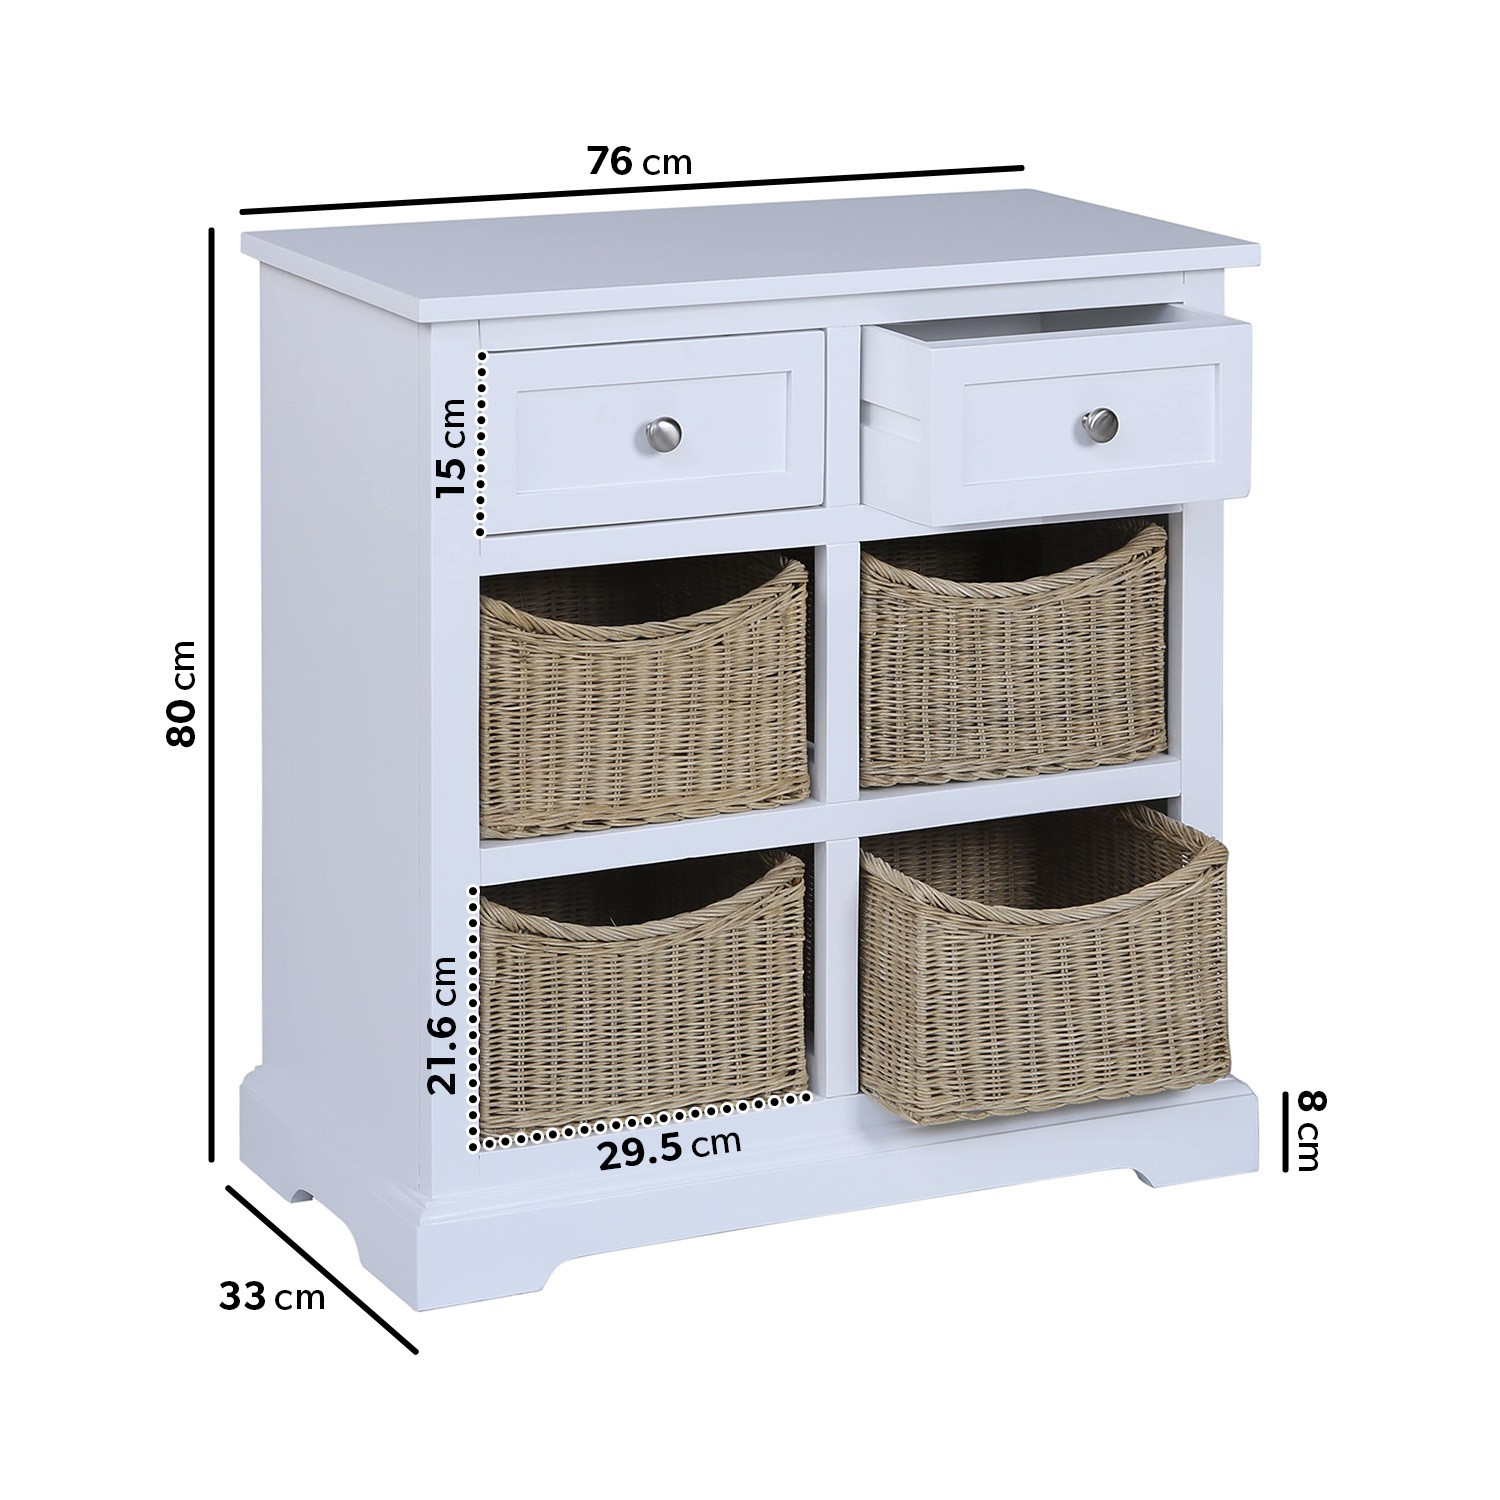 Read more about White solid wood sideboard with shoe storage elms